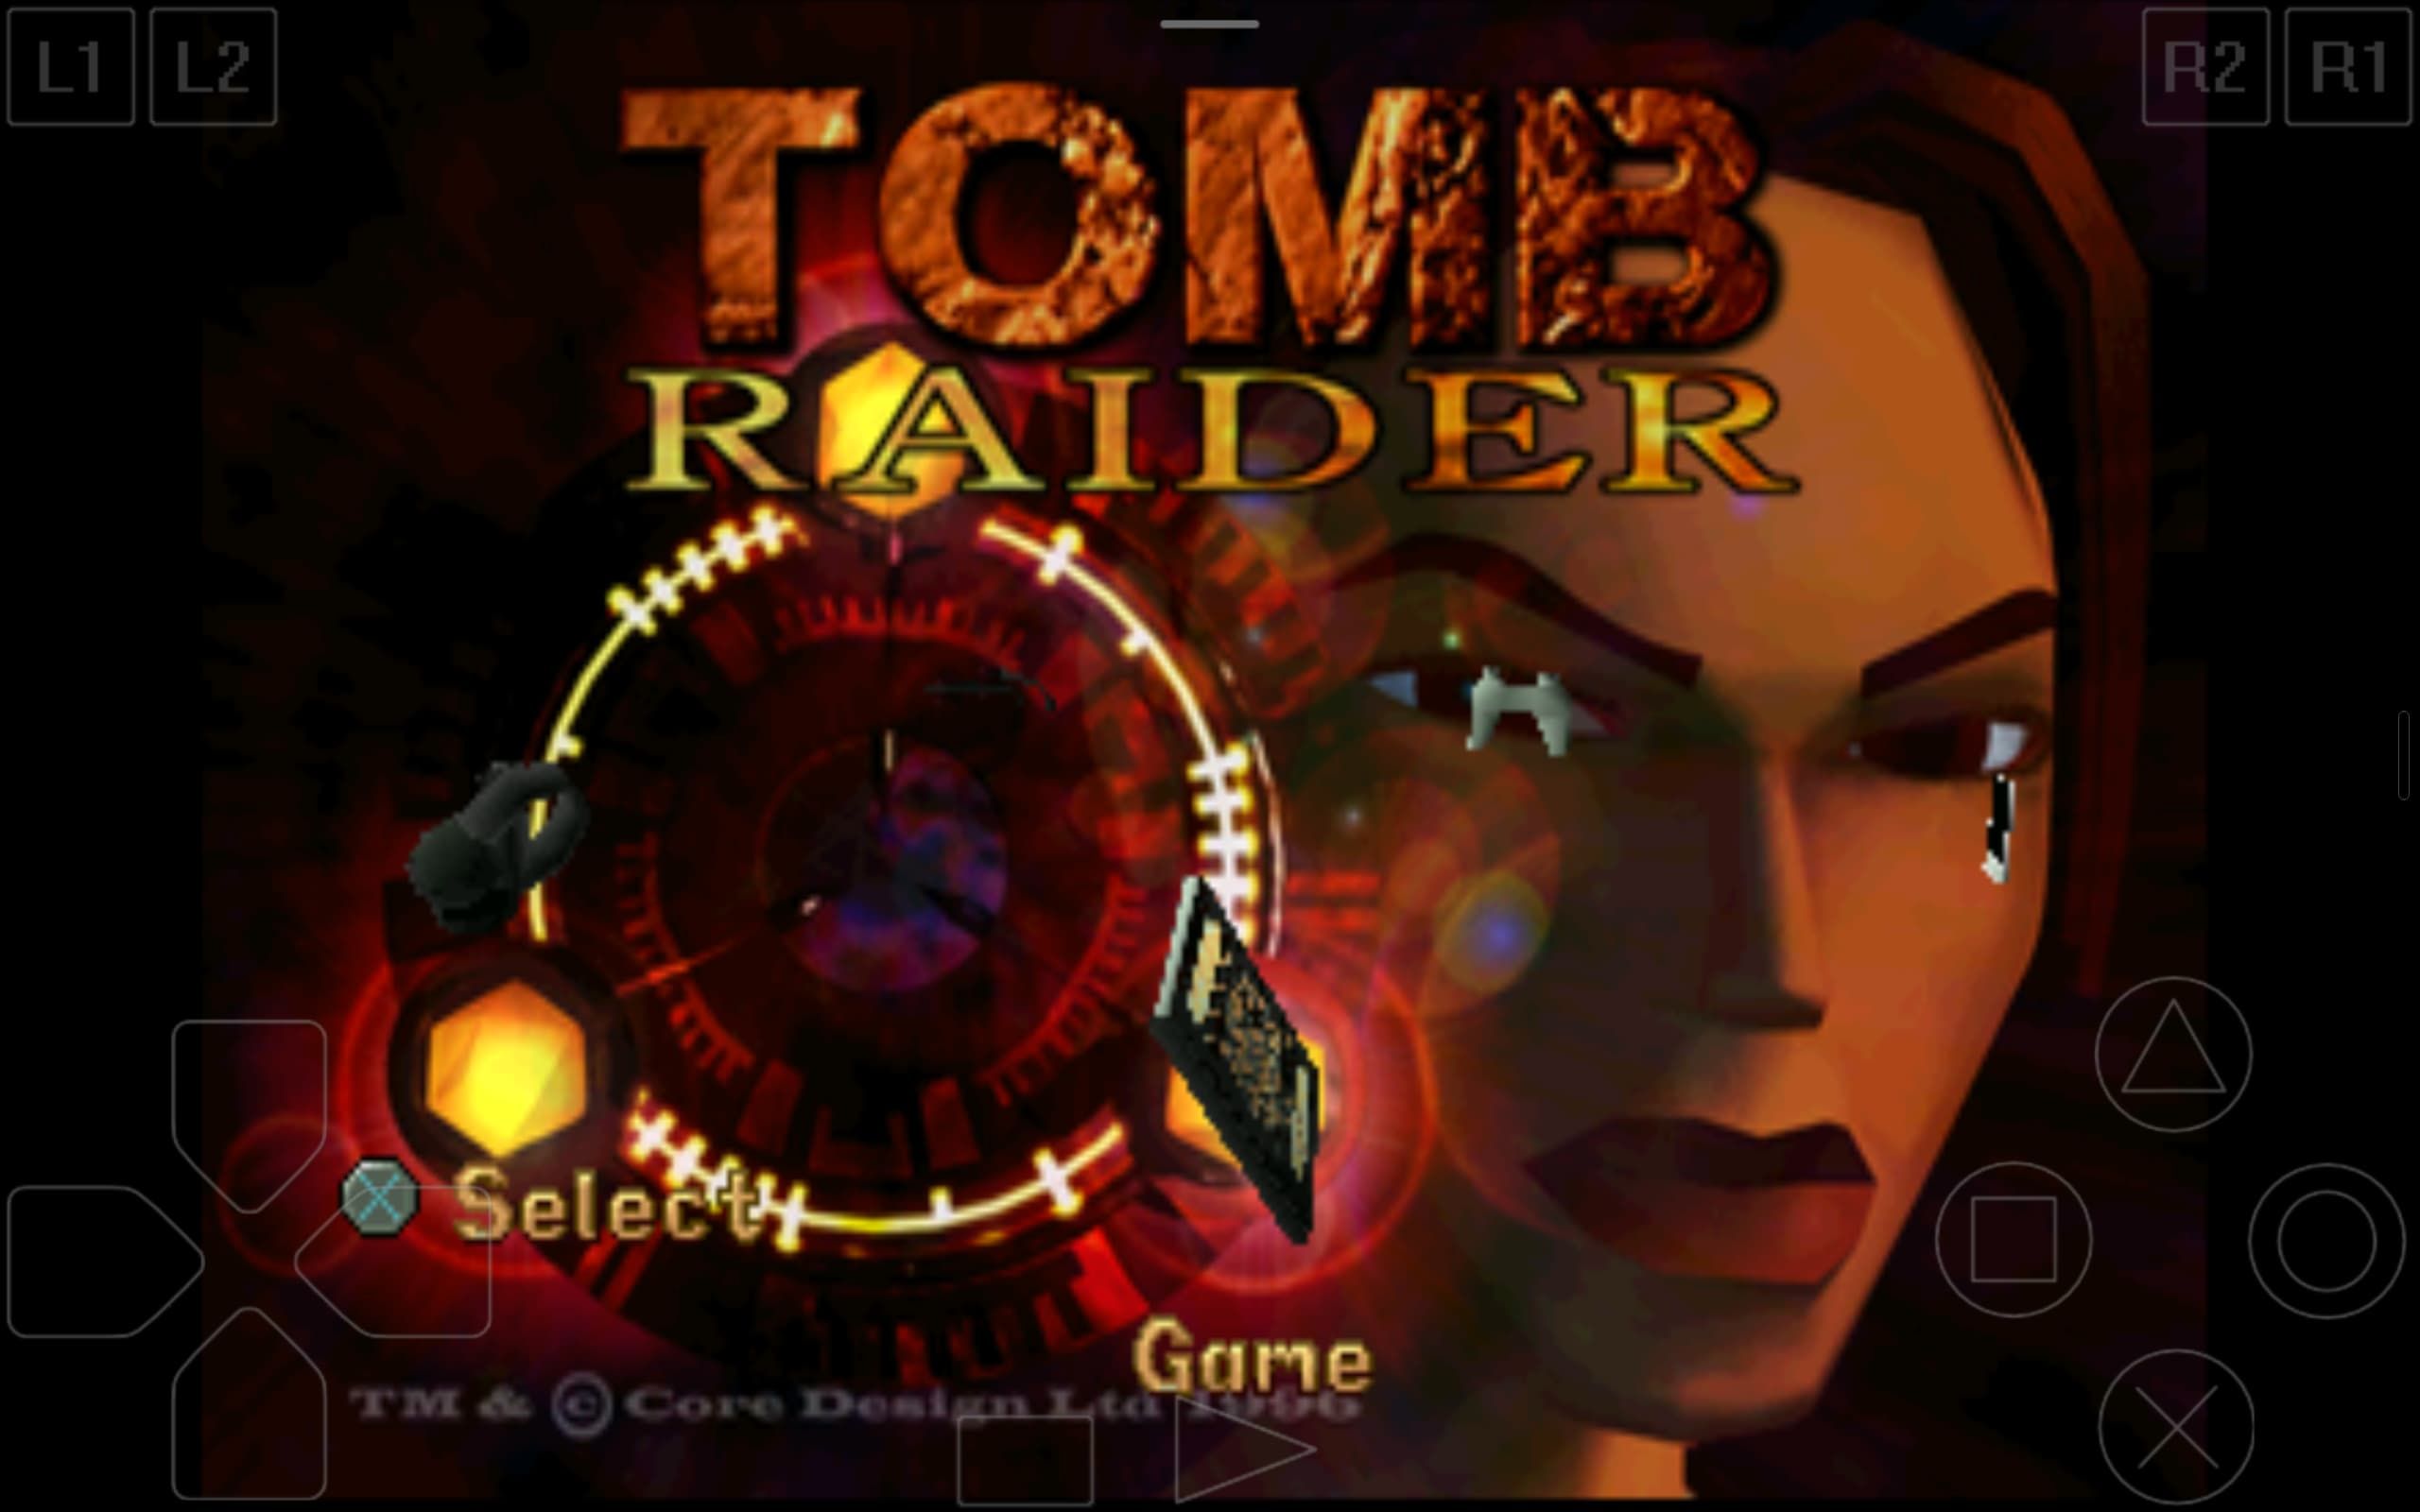 A screenshot of Tomb Raider gameplay on ePSXe Android.